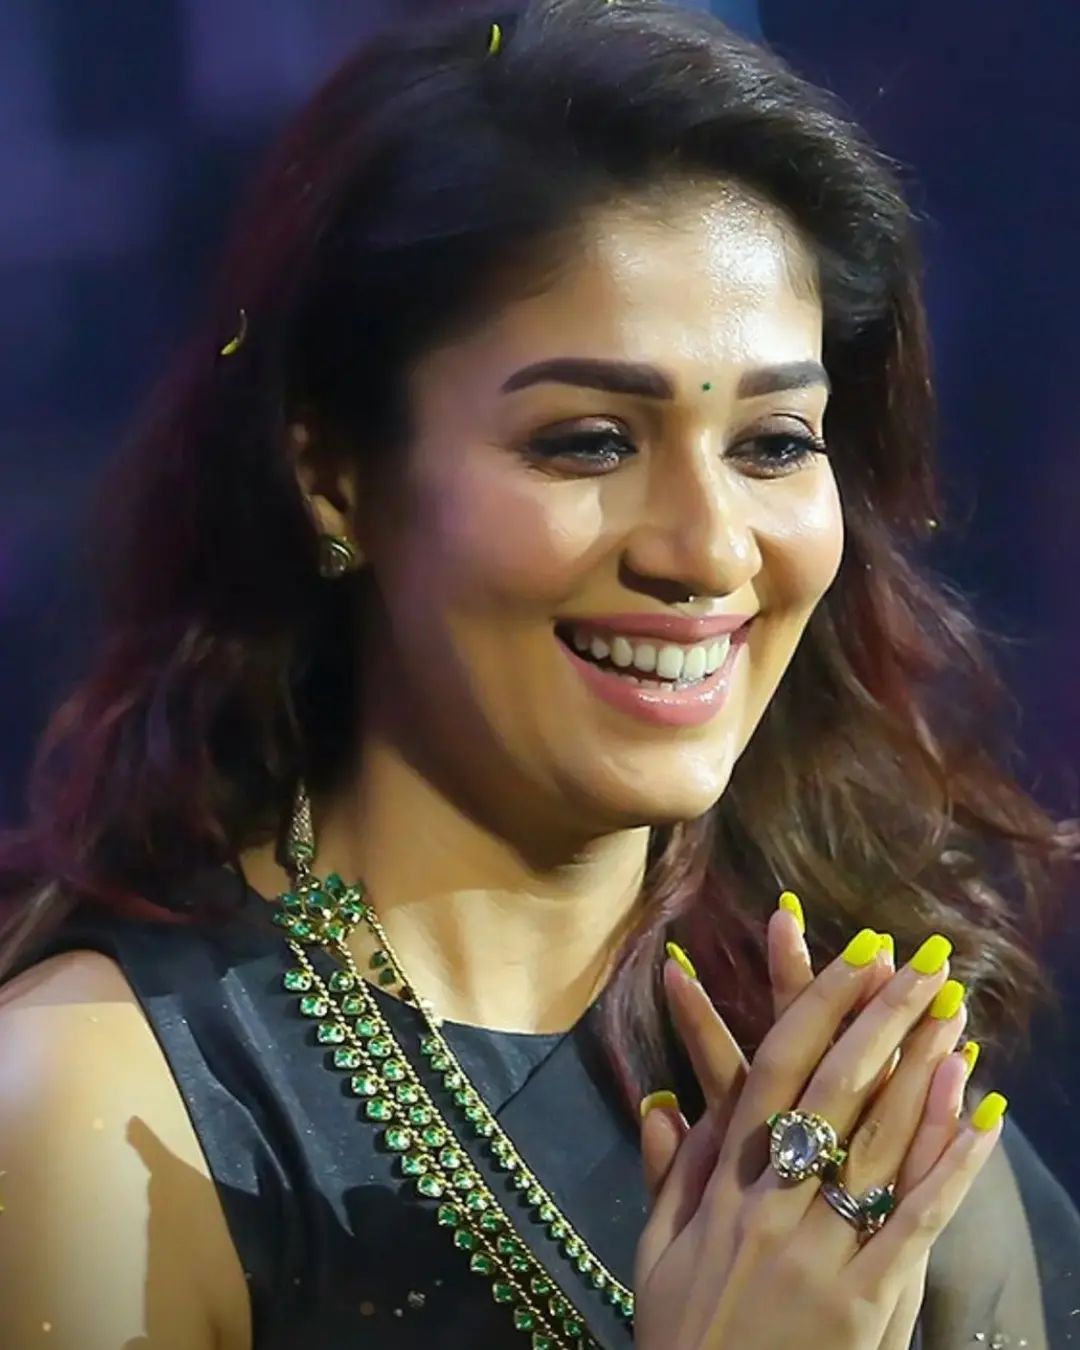 Nayanthara to act as chef in upcoming film information spreading viral on social media